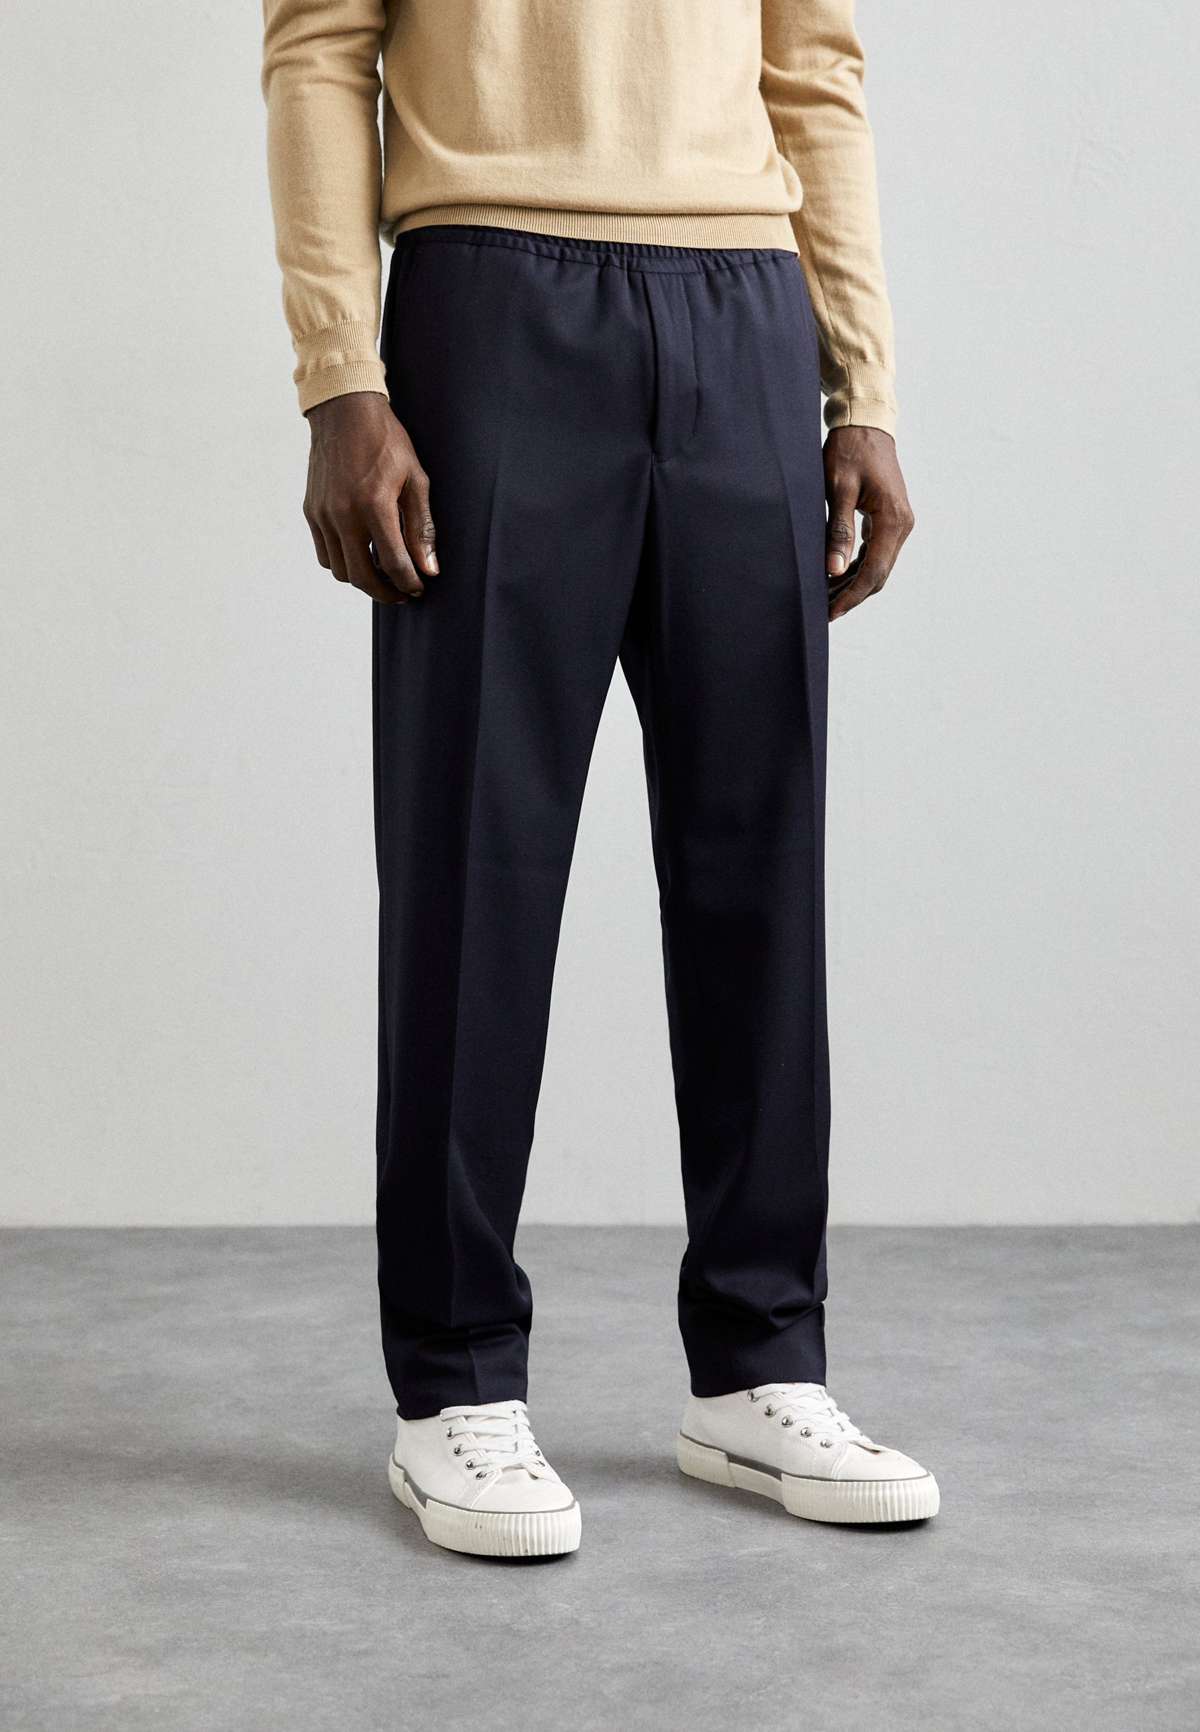 Брюки RELAXED TROUSERS